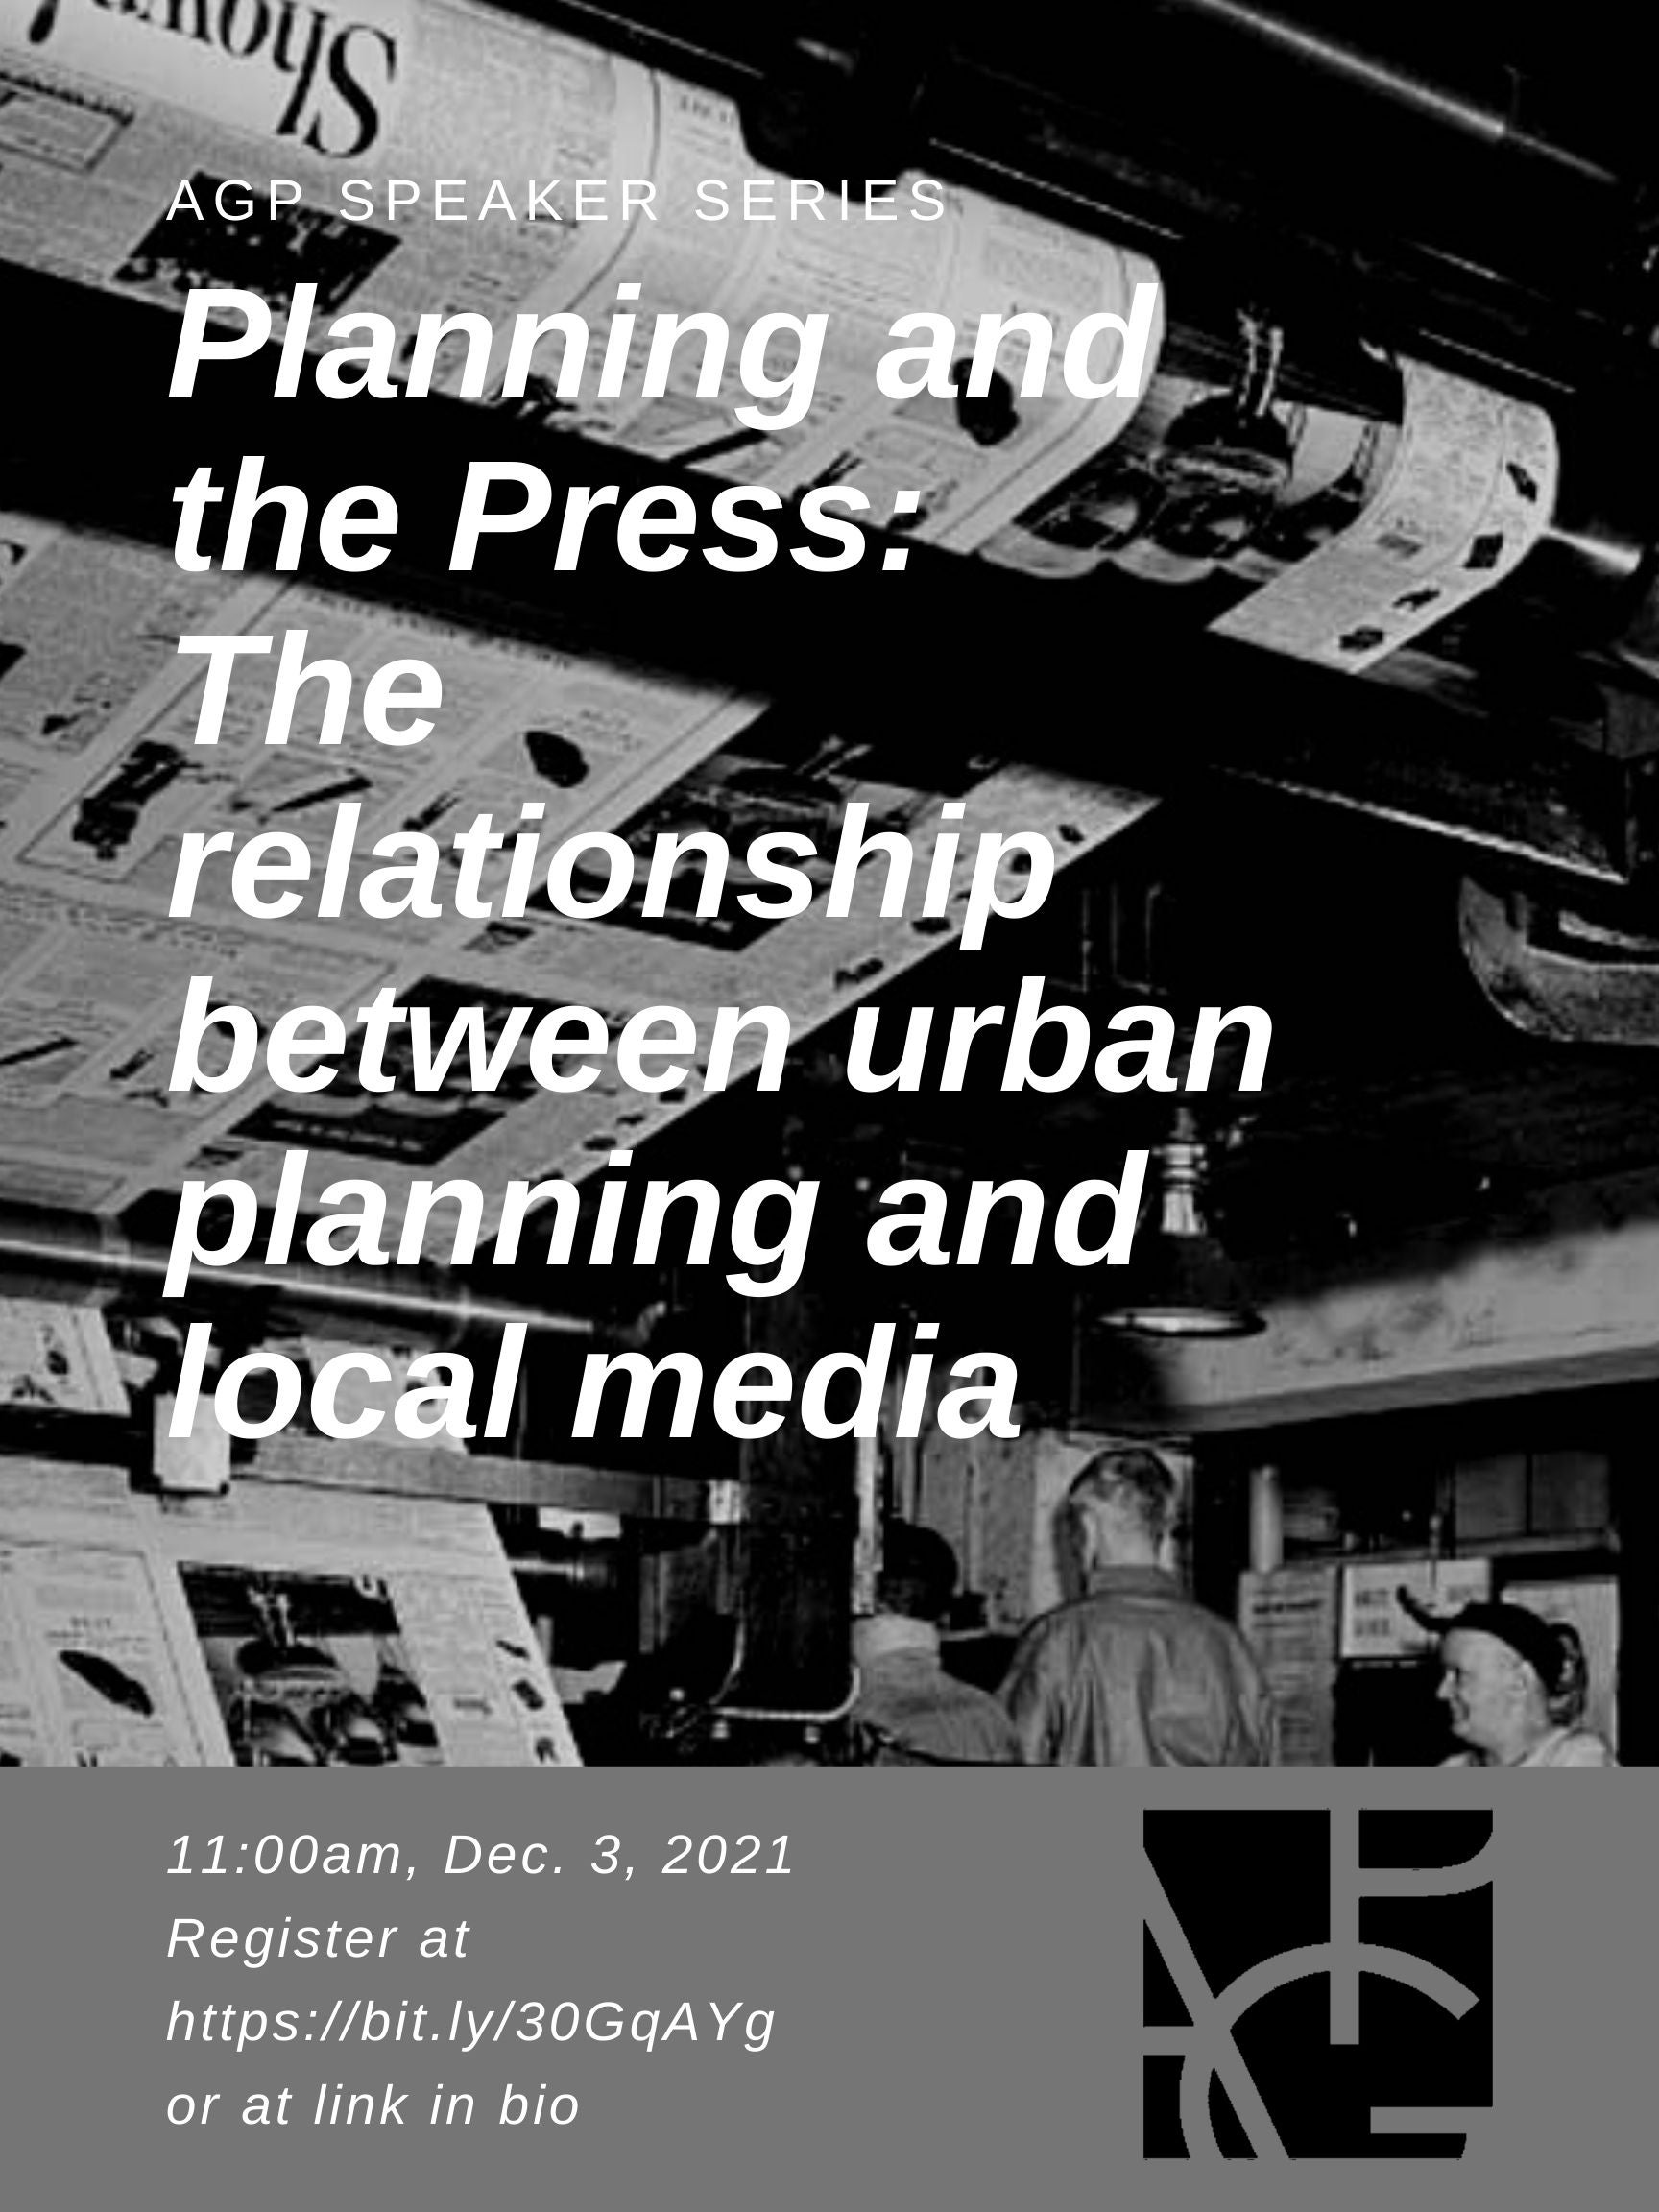 AGP Speaker Series: Planning and the Press poster